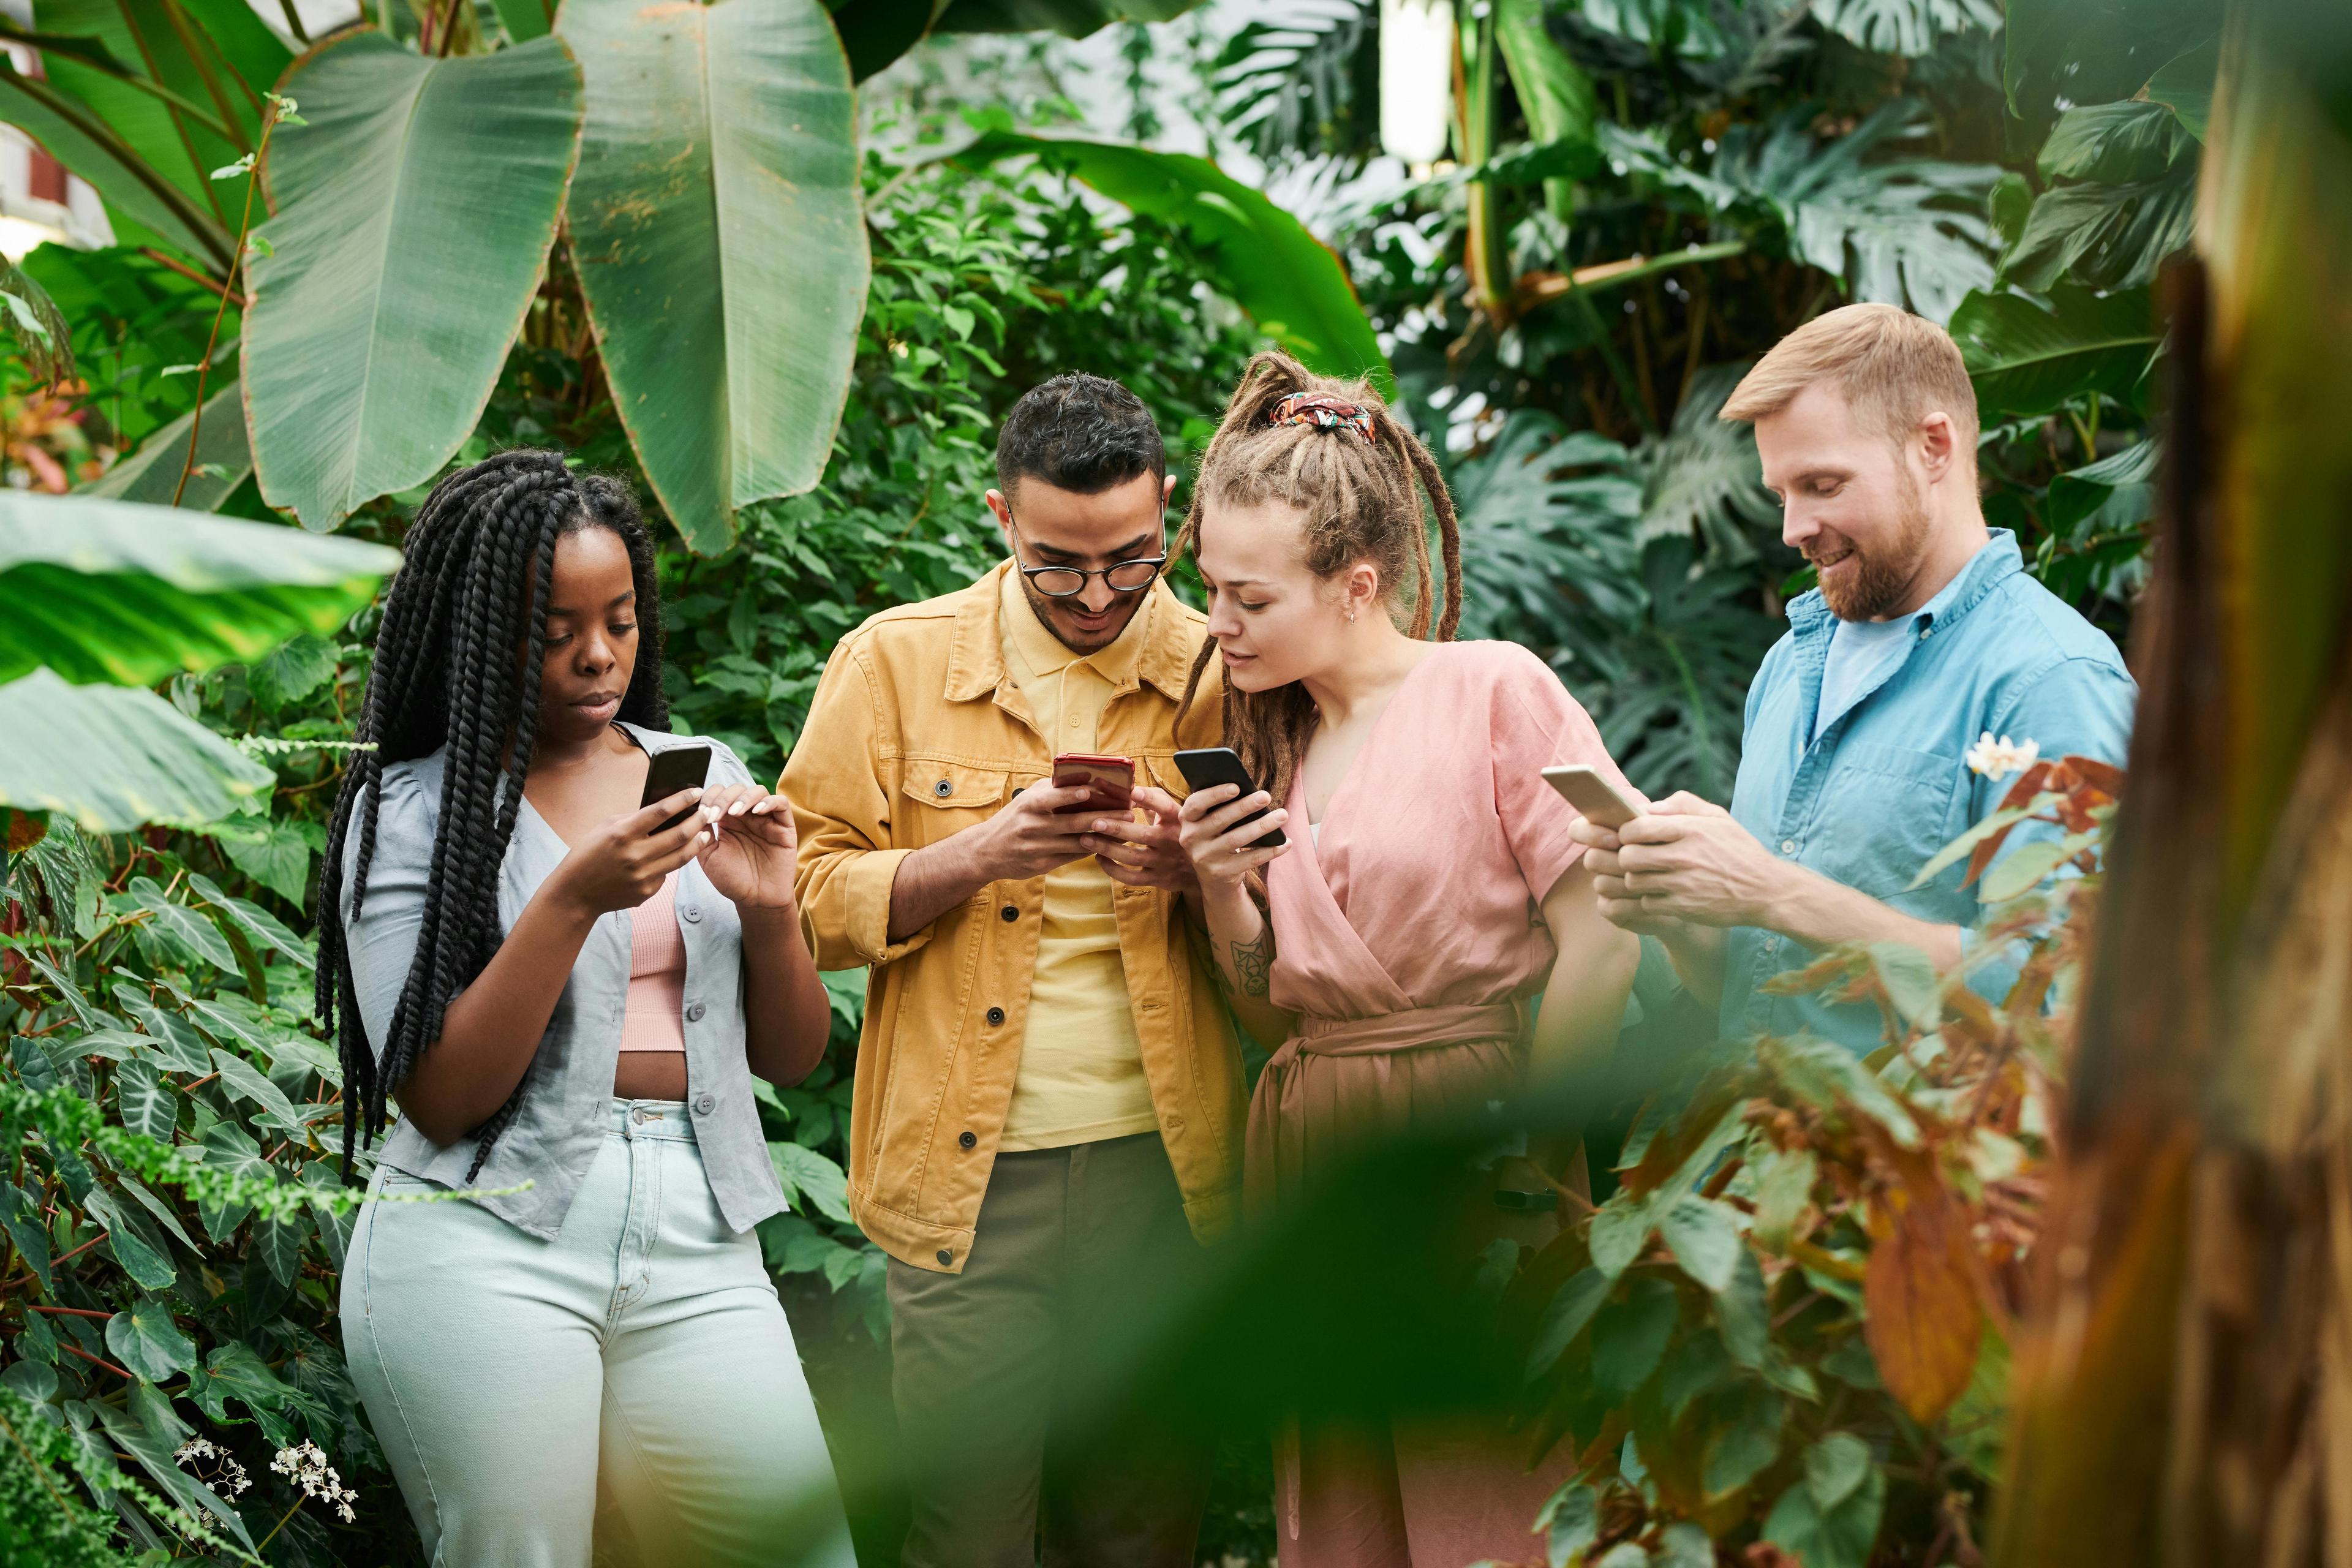 Group of college-aged students eagerly swiping on their mobile phones while surrounded by tropical foliage